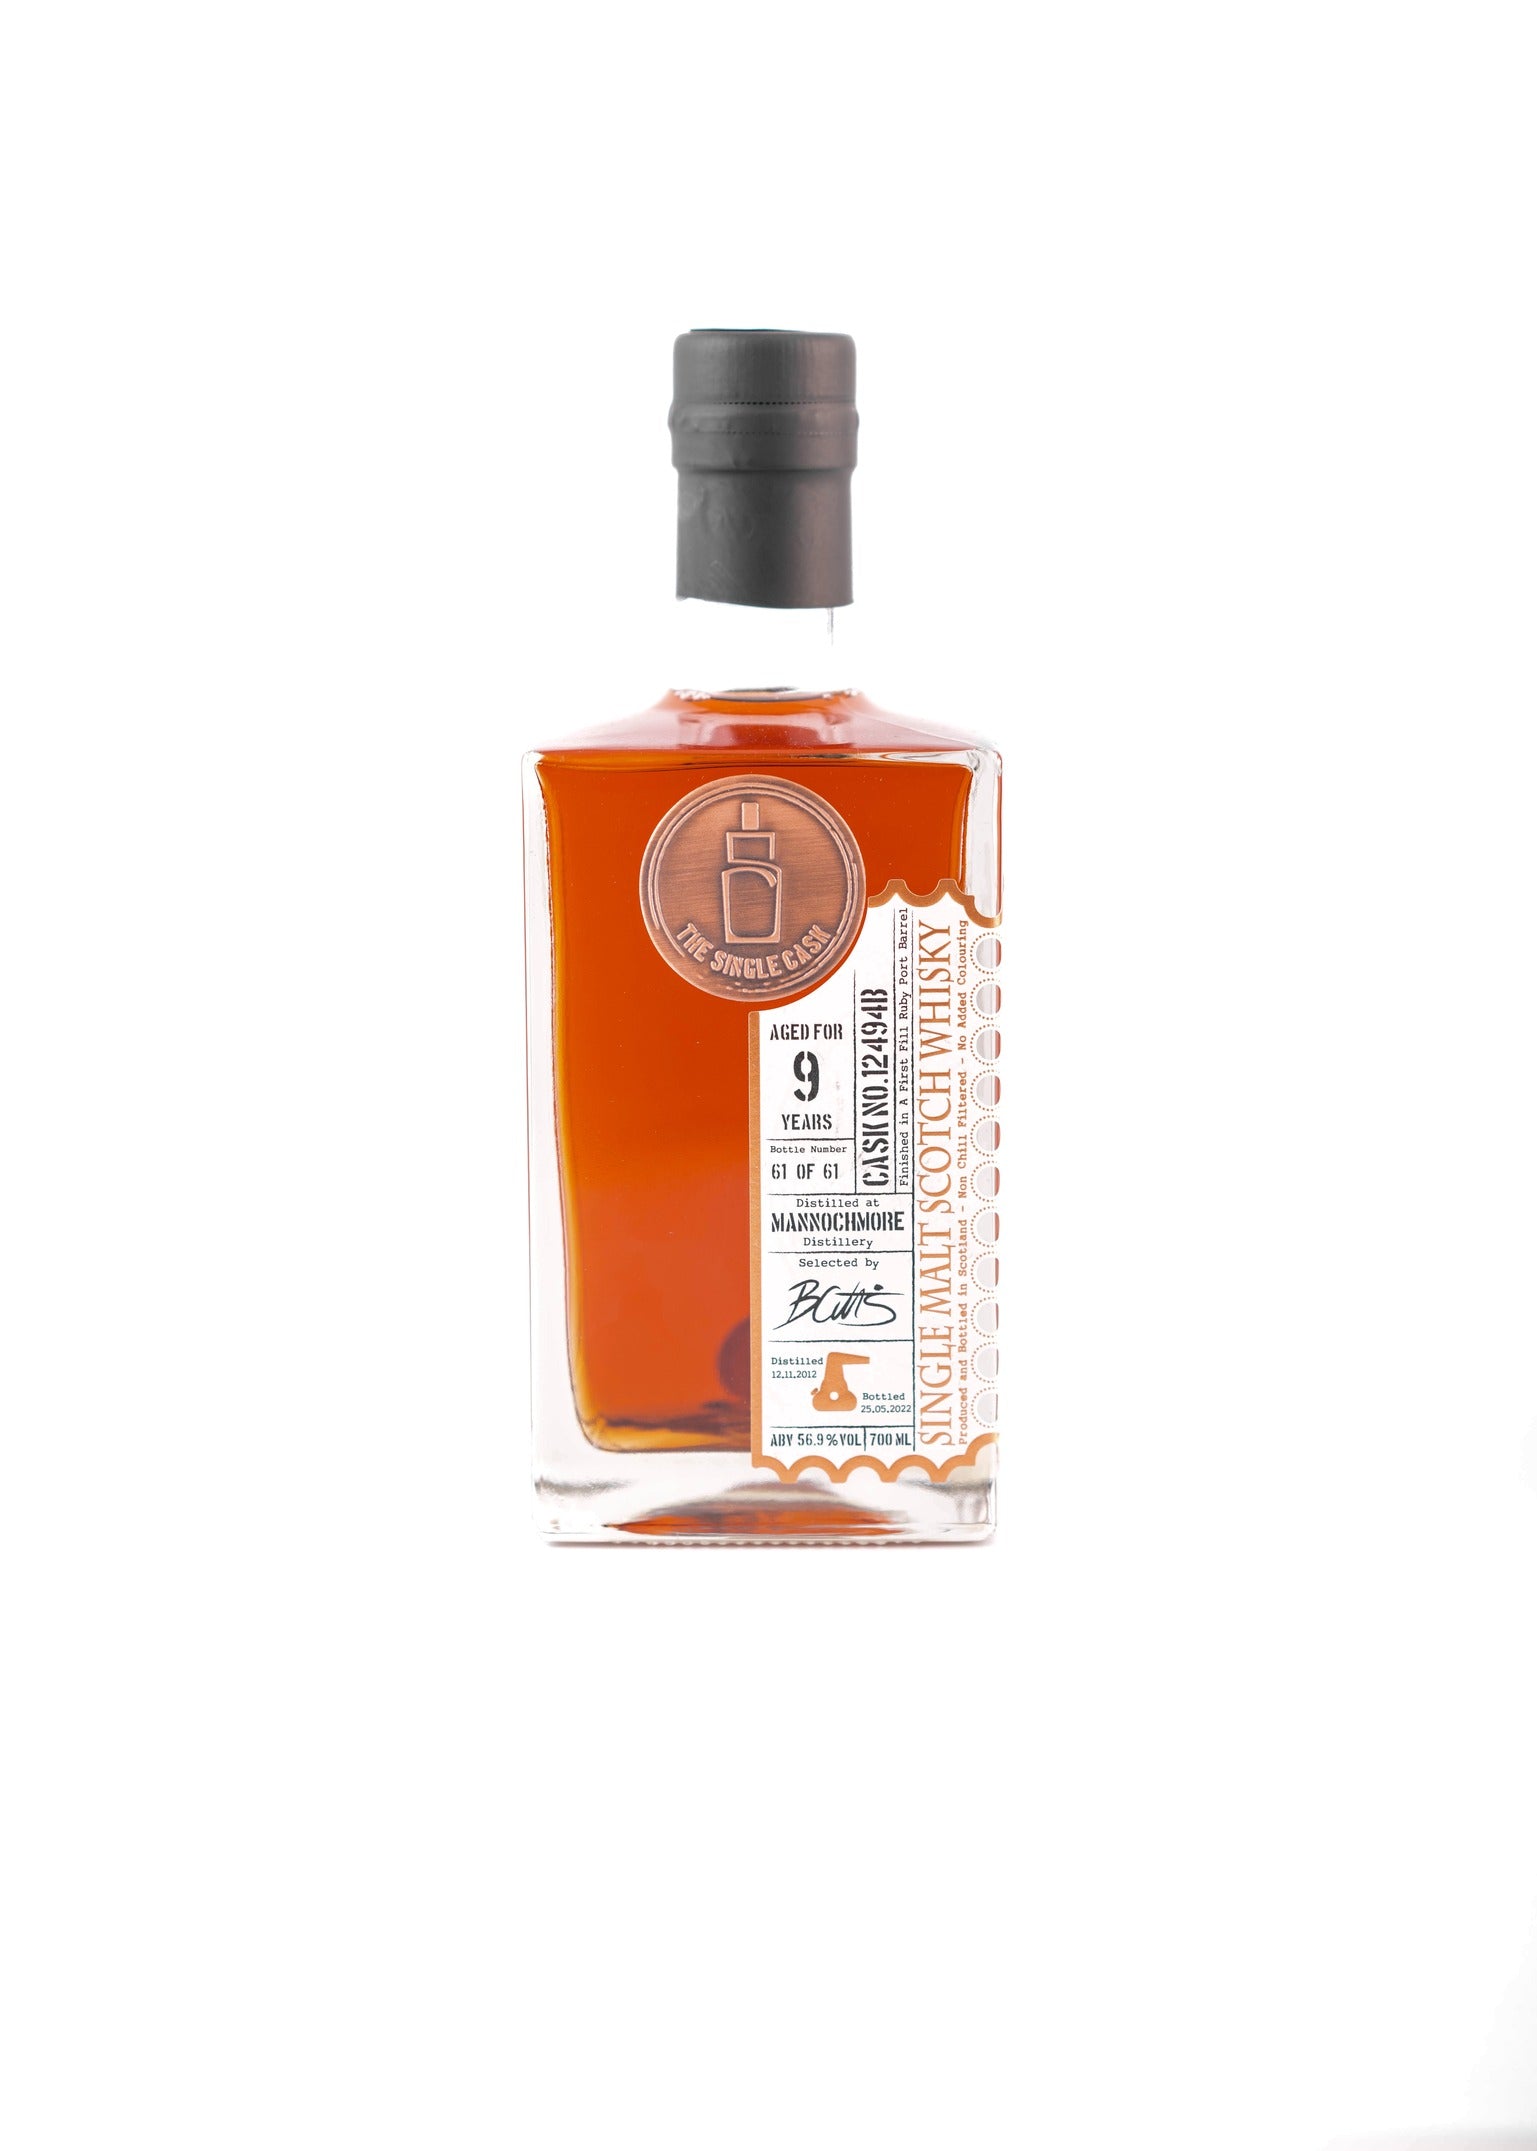 Mannochmore 9 years old single cask scotch whisky